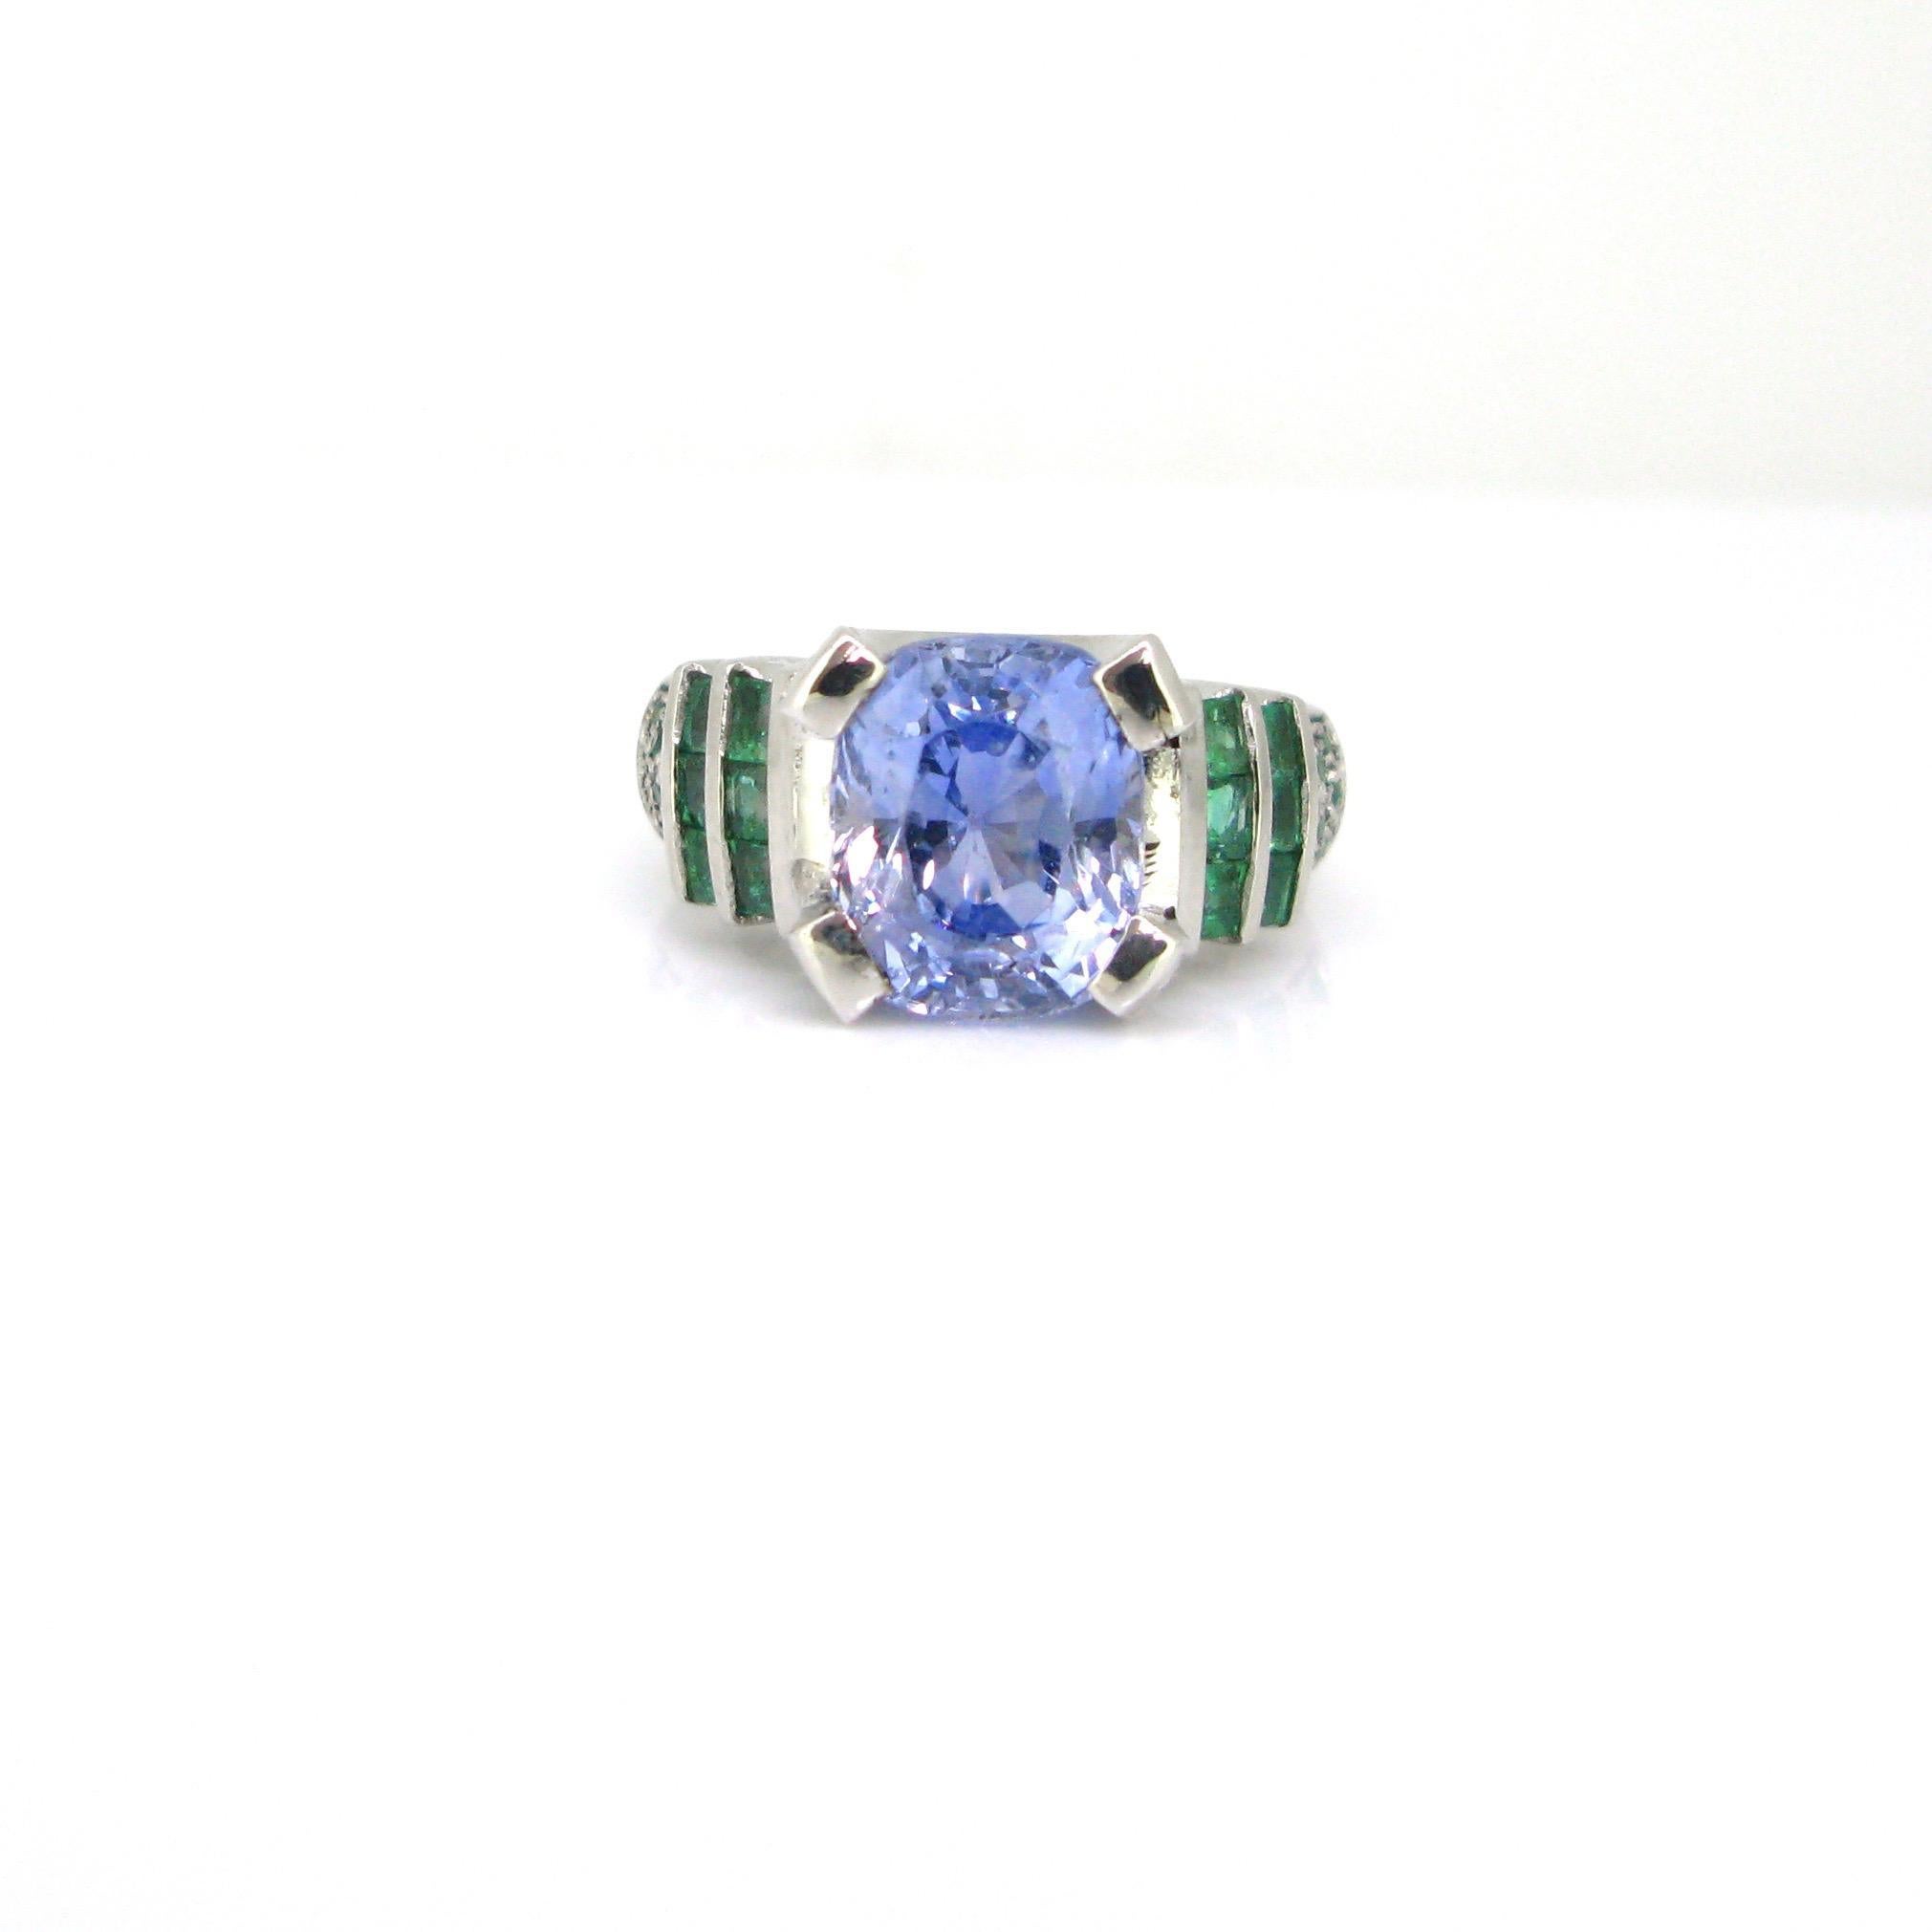 Weight:	14,29gr

Metal:	18kt white Gold

Stones:	1 Sapphire
•	Cut:	Cushion
•	Carat:	6,75ct
•	Origin:	Ceylon (Sri Lanka)
•	Comments:	No indication of heating

Others:	44 Emeralds
•	Cut:	32 Round cut – 12 Square cut
•	Total Carat Weight:	0.80ct